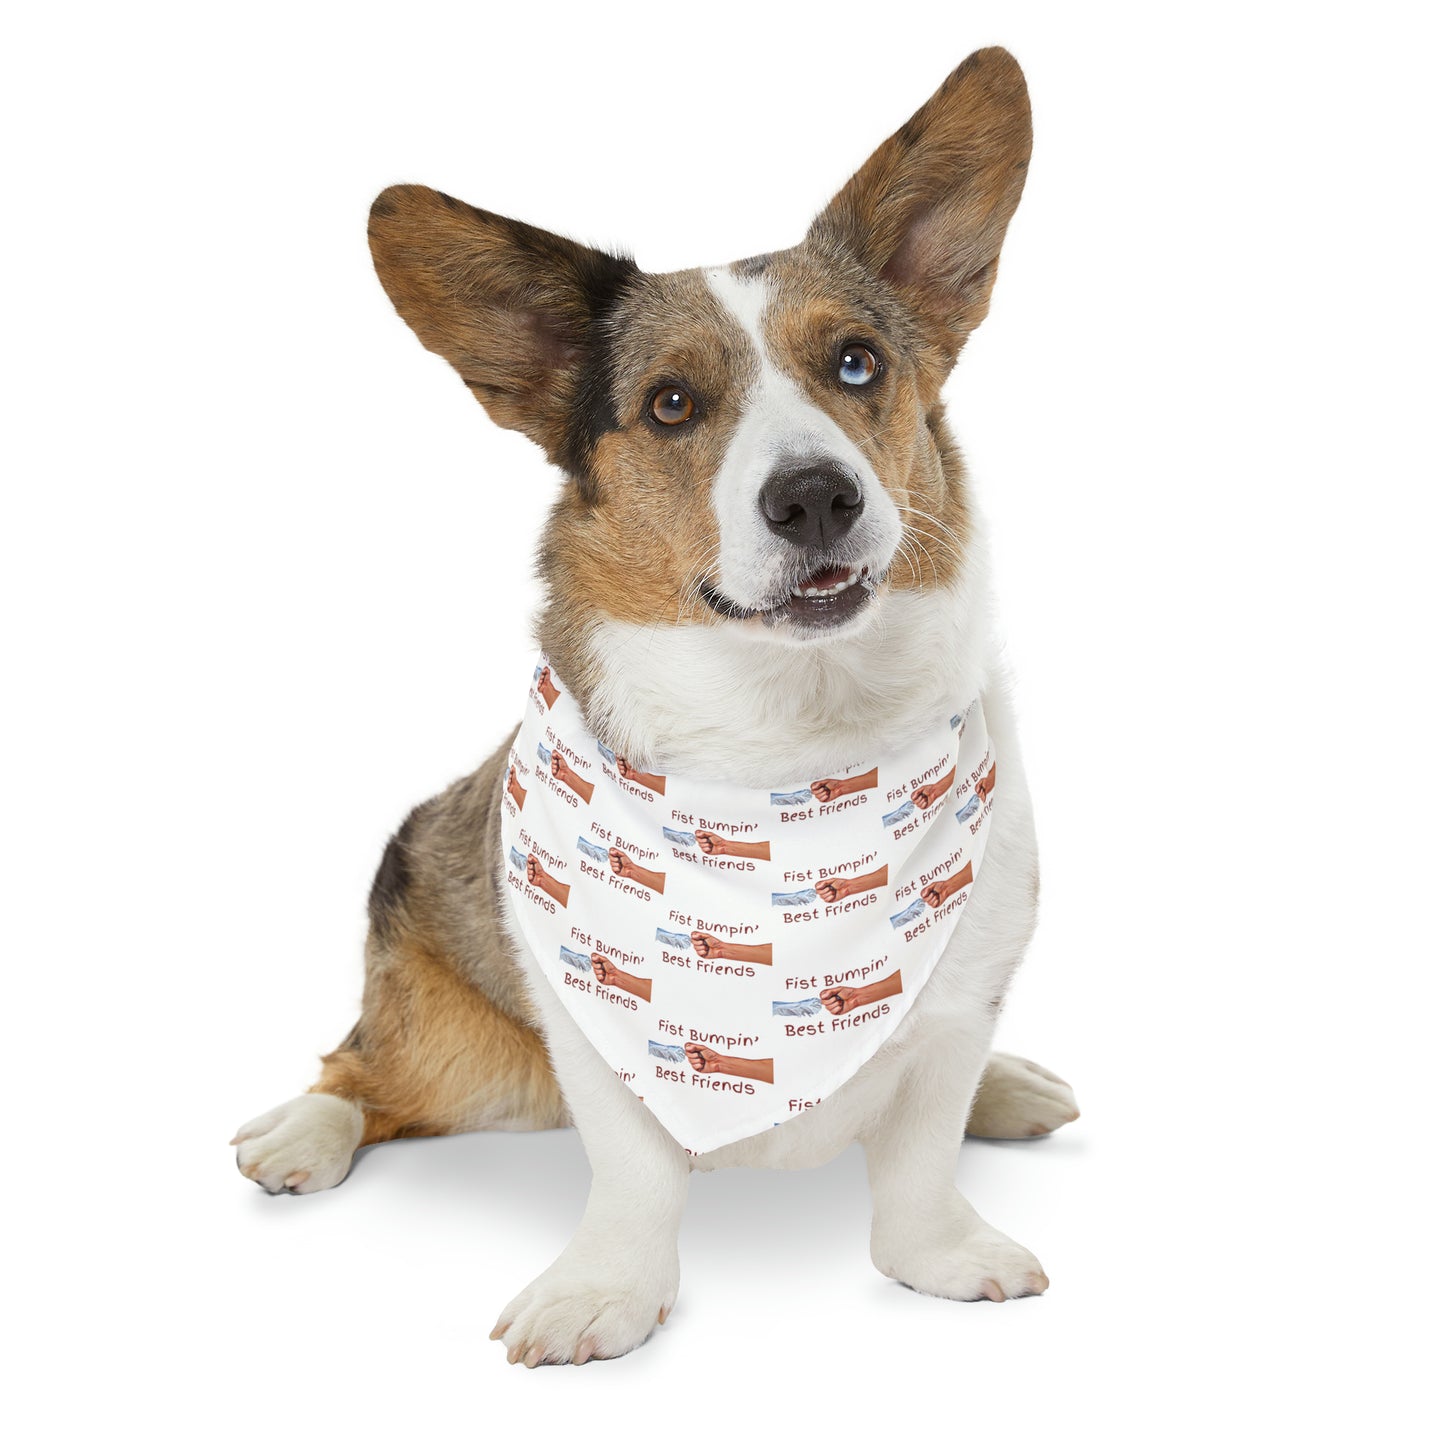 Fist Bumpin’ Best Friends Opie’s Cavalier King Charles Spaniel Pet Bandana Collar White with Red lettering.